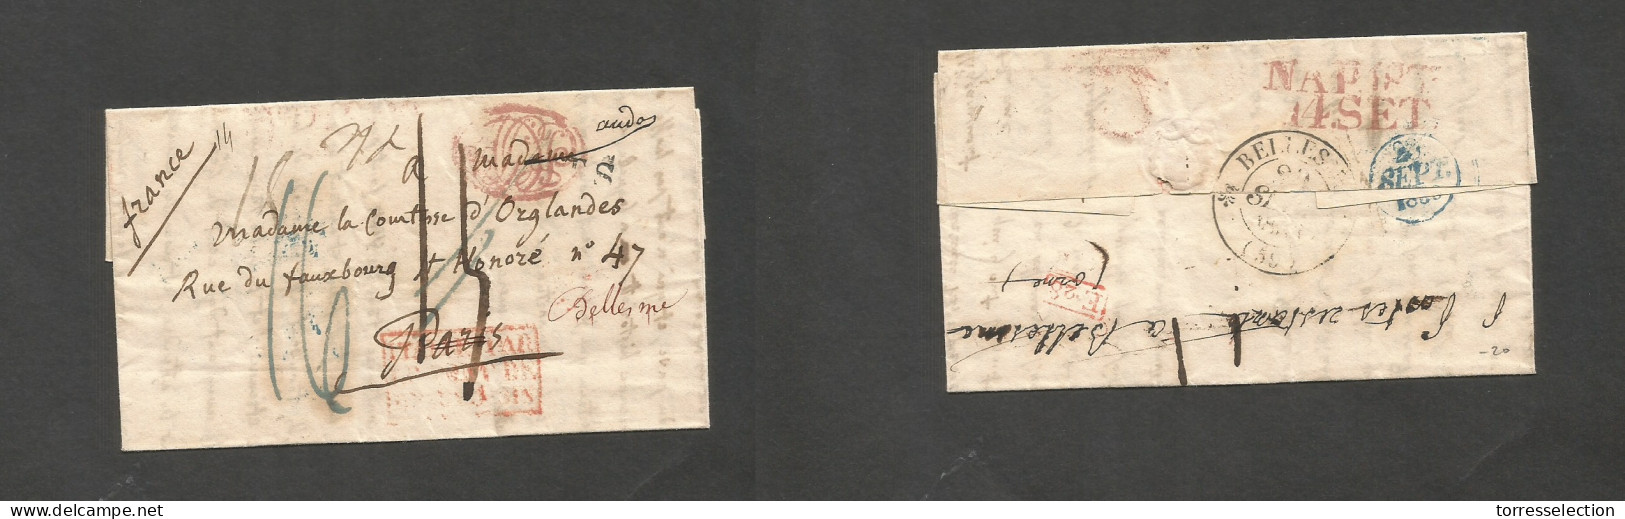 Italy - Prephilately. 1833 (14 Sept) Napoli - France, Paris, Fwded (29 Sept) Bellesme. Stampless E. With Text Several Tr - Non Classificati